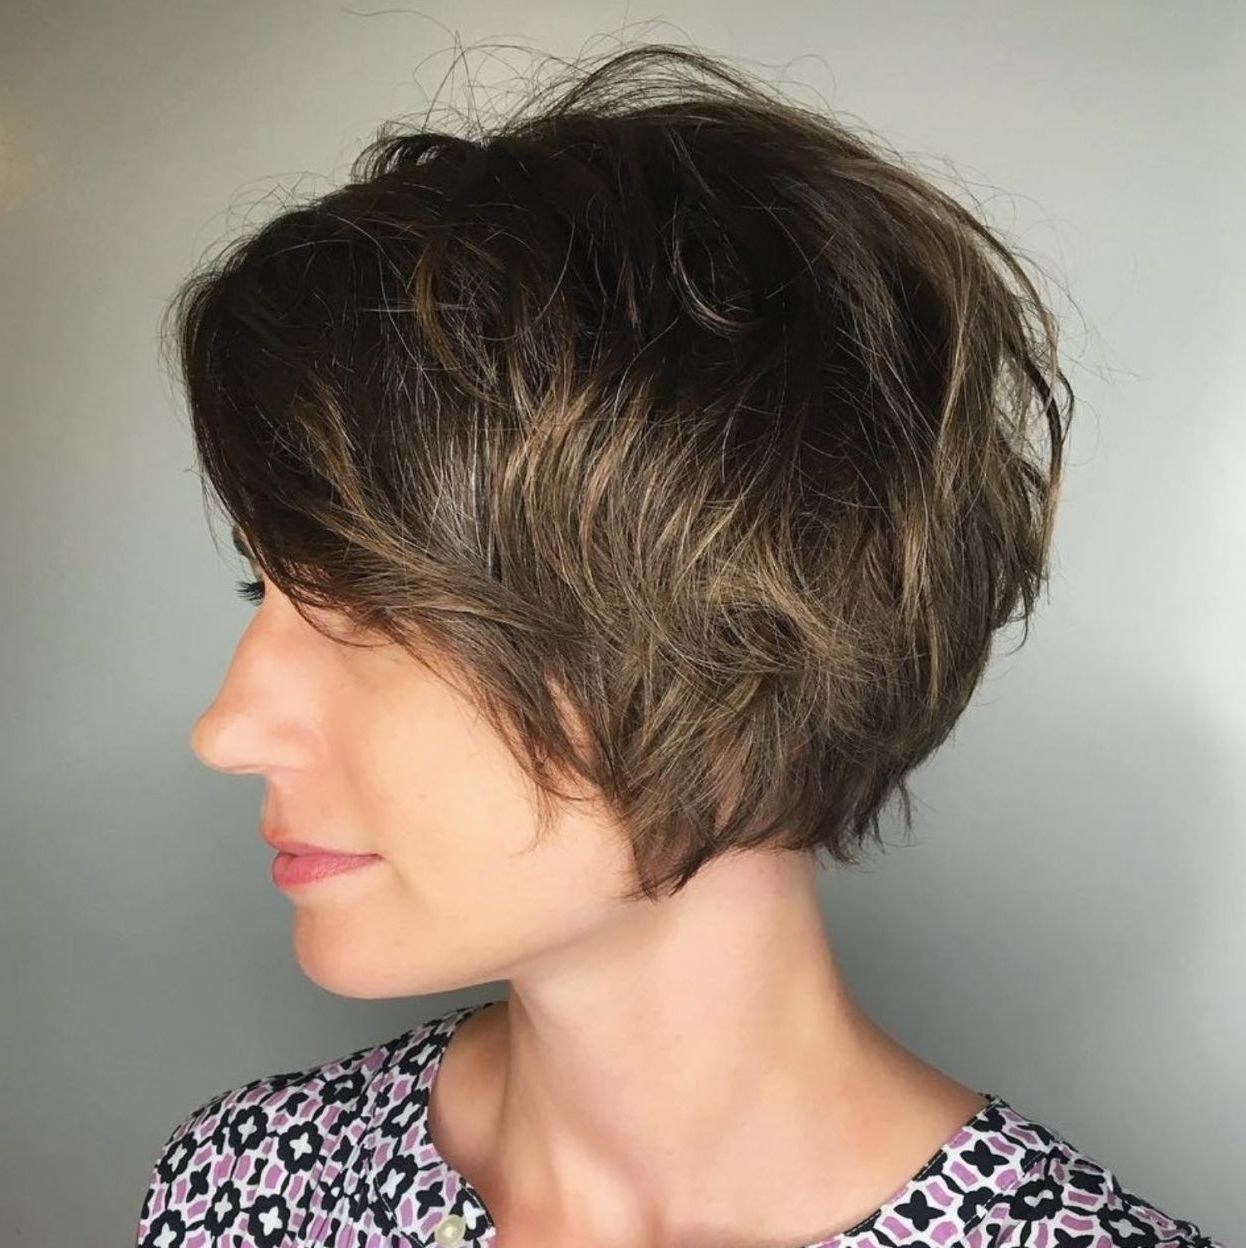 60 Classy Short Haircuts And Hairstyles For Thick Hair | Short Hairstyles  For Thick Hair, Thick Hair Styles, Short Wavy Hair Intended For Layered Messy Pixie Bob Hairstyles (View 14 of 25)